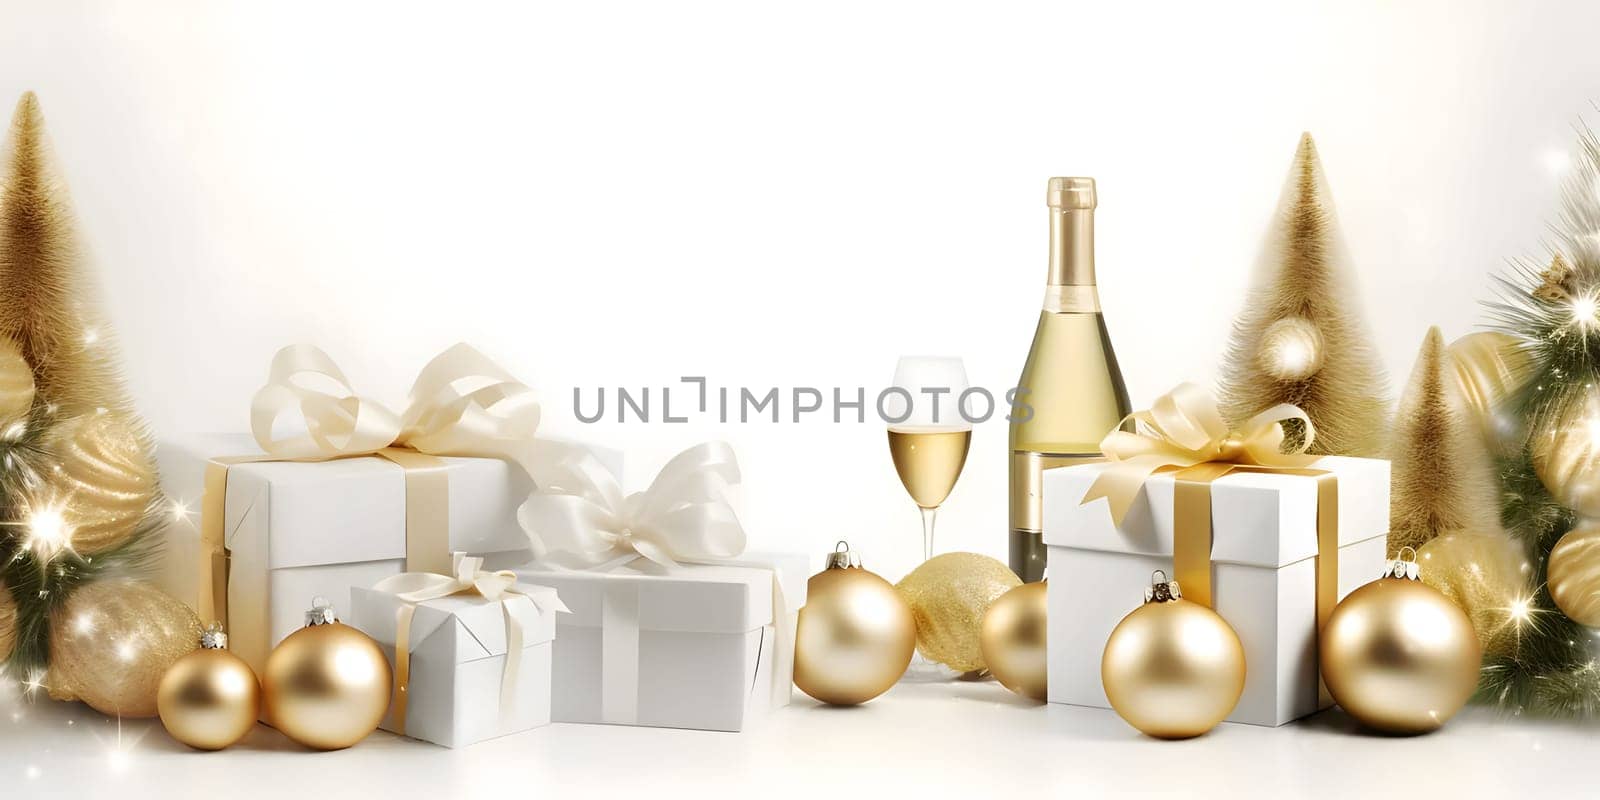 Christmas trees with gold baubles, gifts with gold bows, champagne bottle and glass. Bright background, banner with space for your own content. by ThemesS